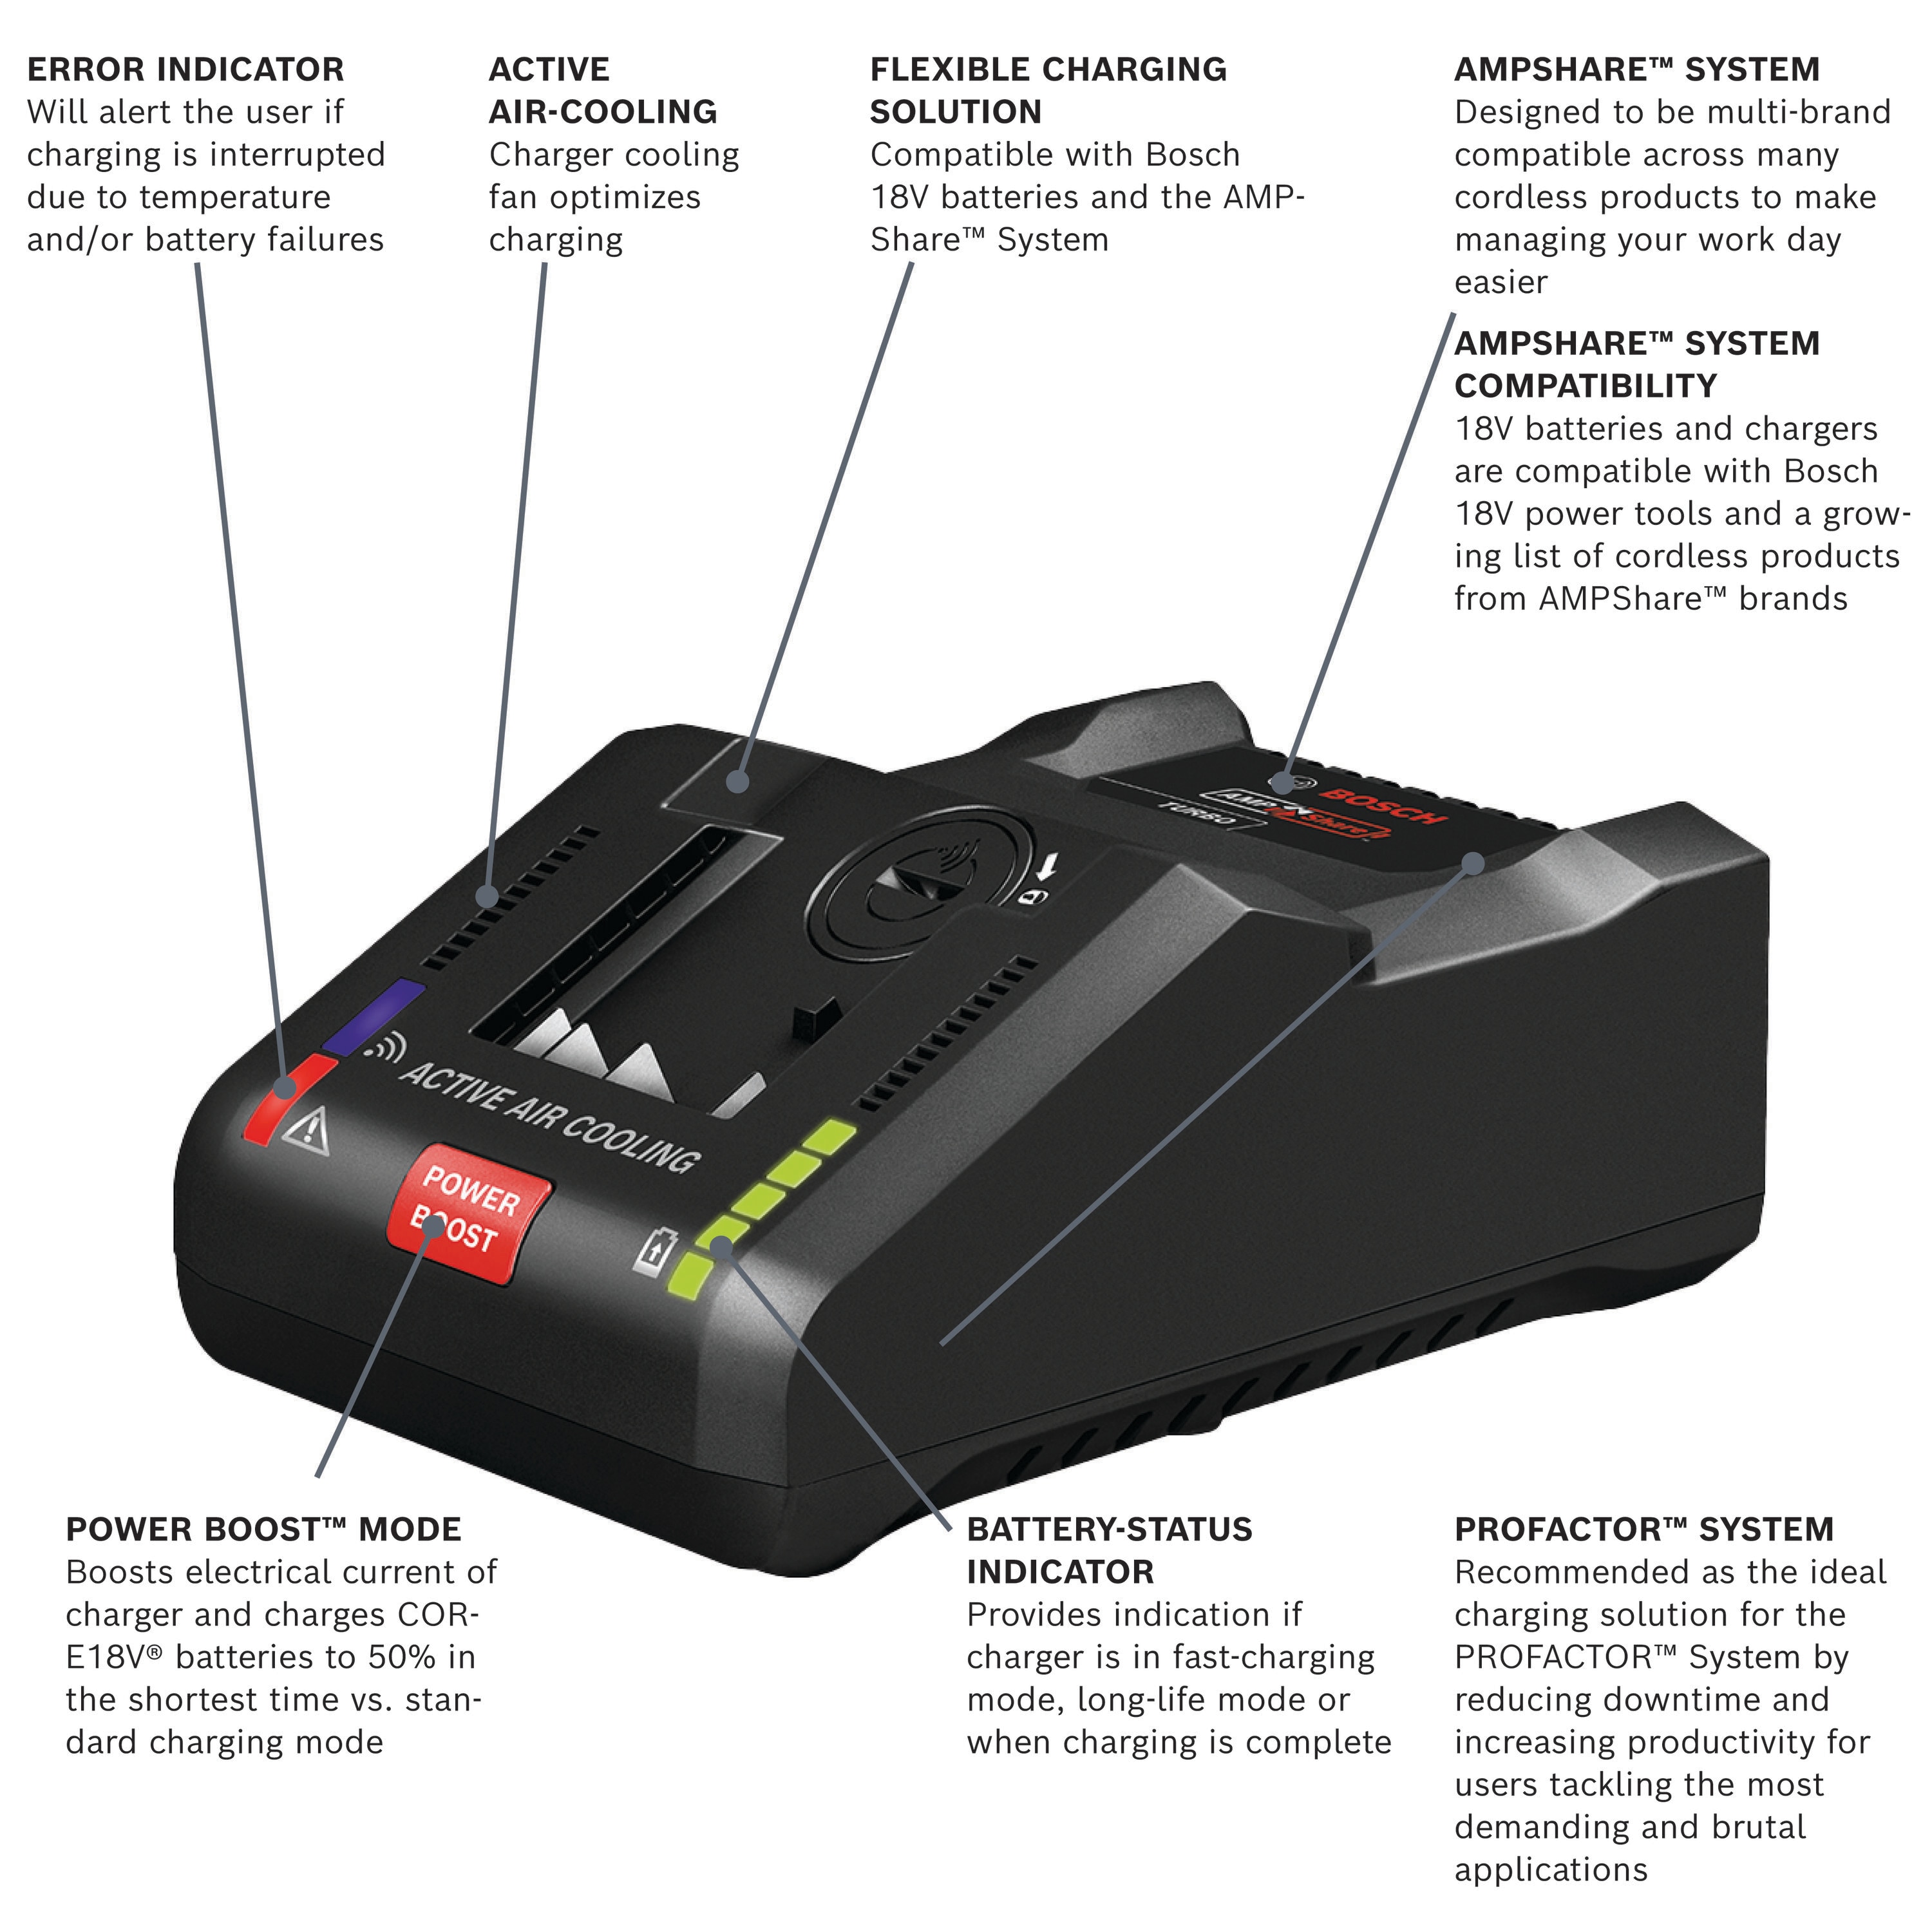 Bosch 18-V Lithium-ion Battery Charger (8 Ah) in the Power Tool